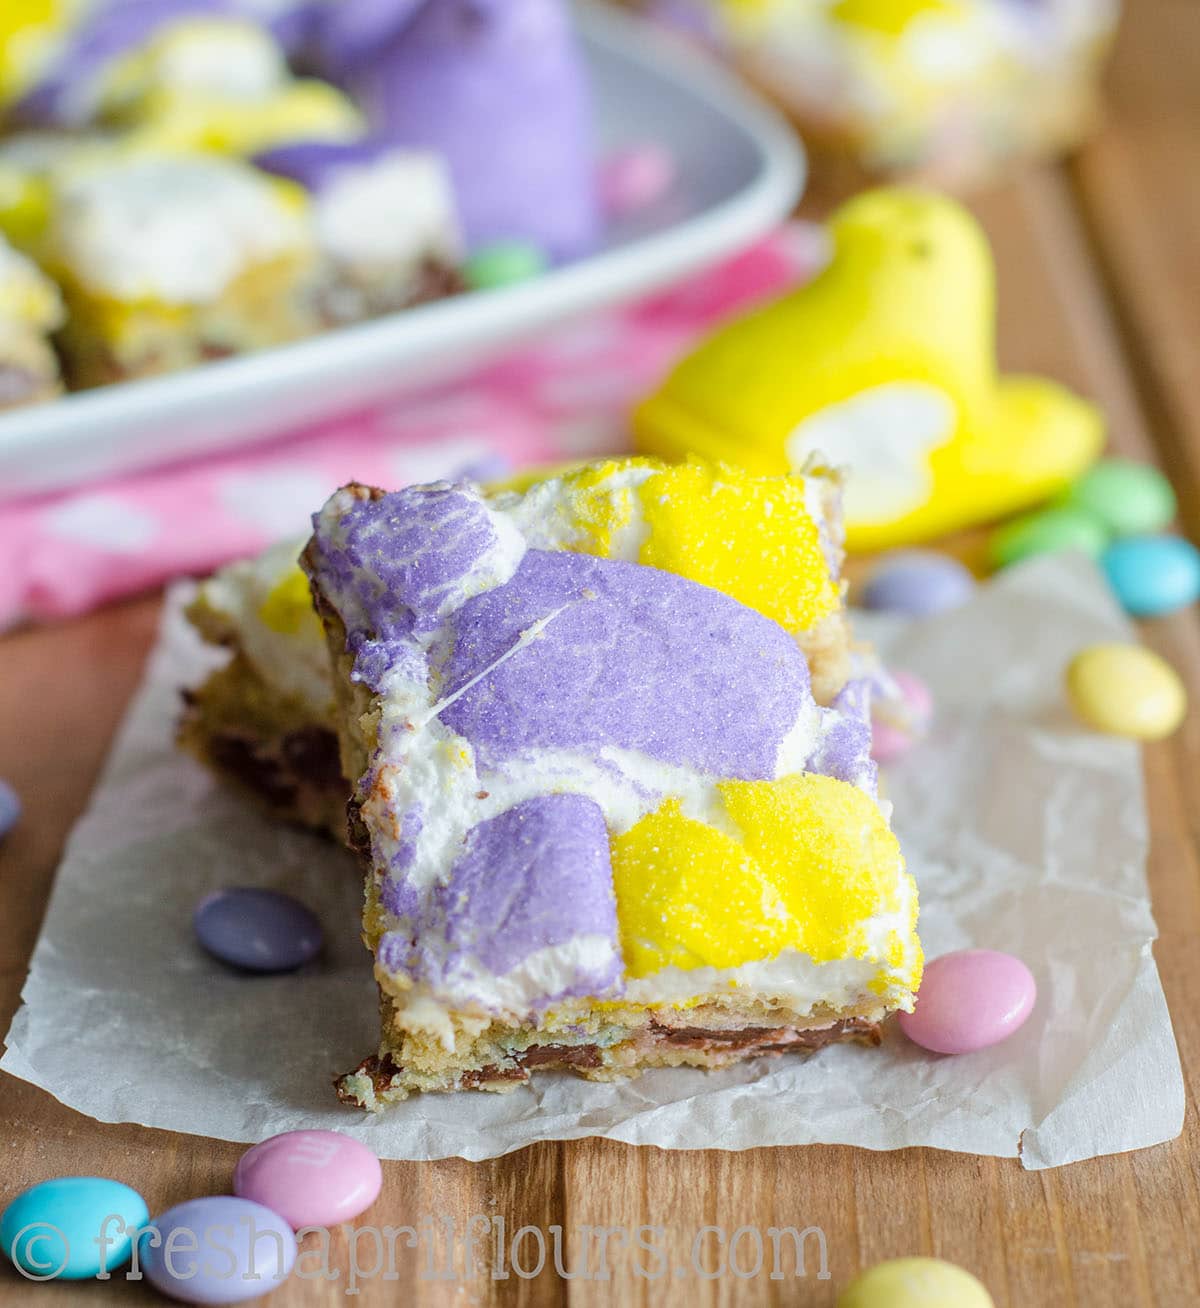 Peeps Blondies: Buttery, chewy blondies filled with milk chocolate m&m's and topped with gooey, melted Peeps. Perfect for Easter!